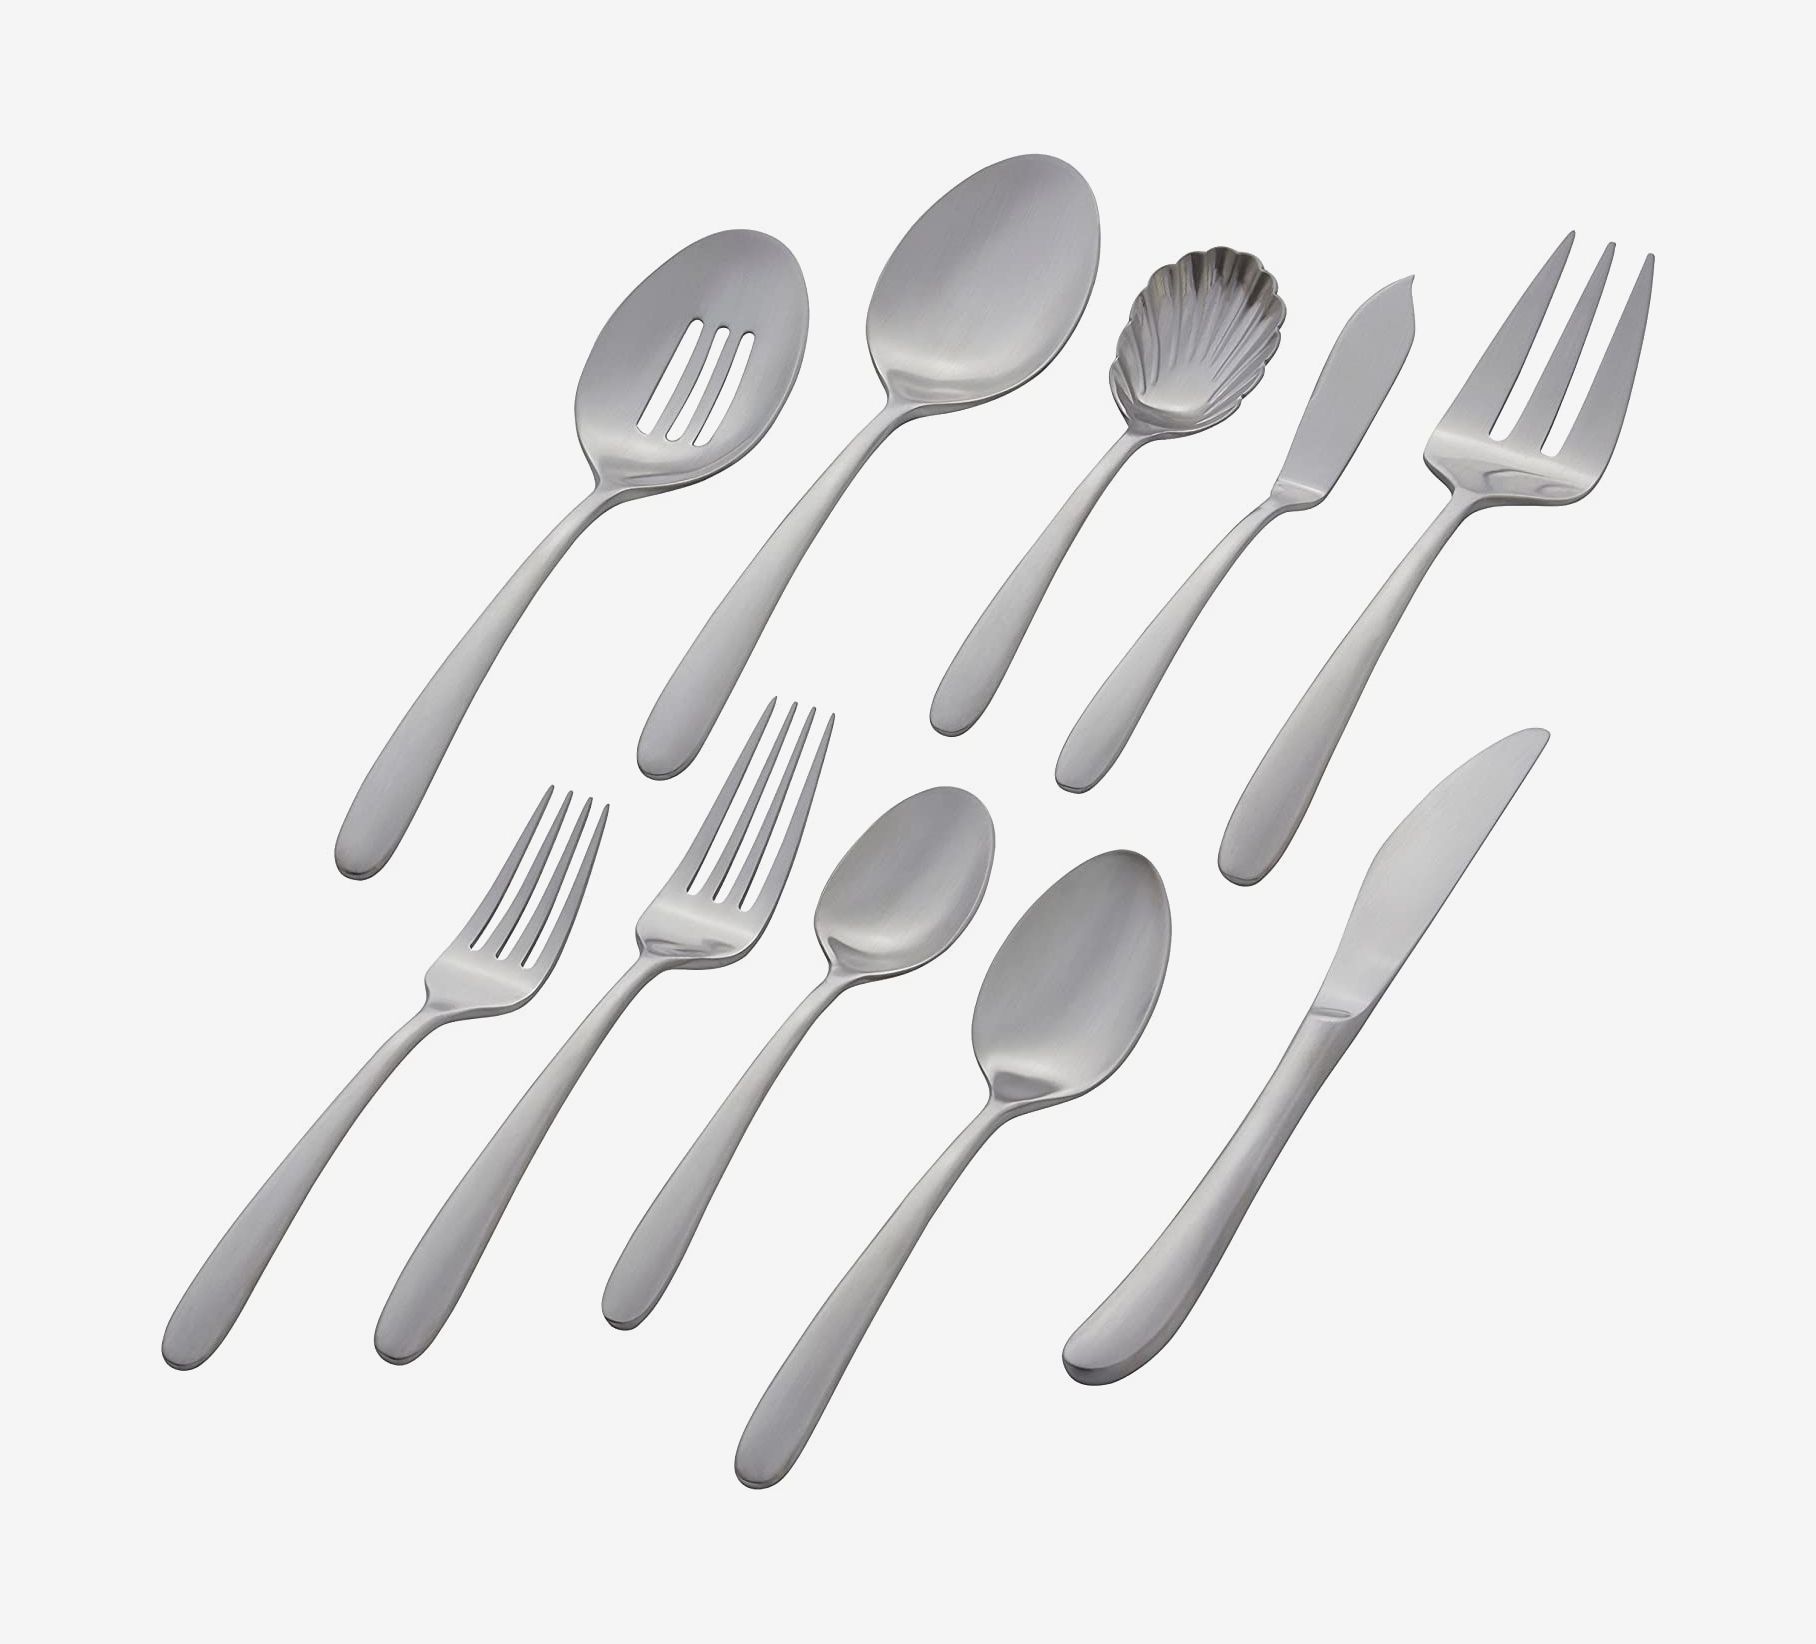 BRIIEC Matte Silver Silverware Set Satin Finish 36-Piece Stainless Steel Flatware Set with Flat Handle Include coffee spoon Kitchen Utensil Set Service for 6